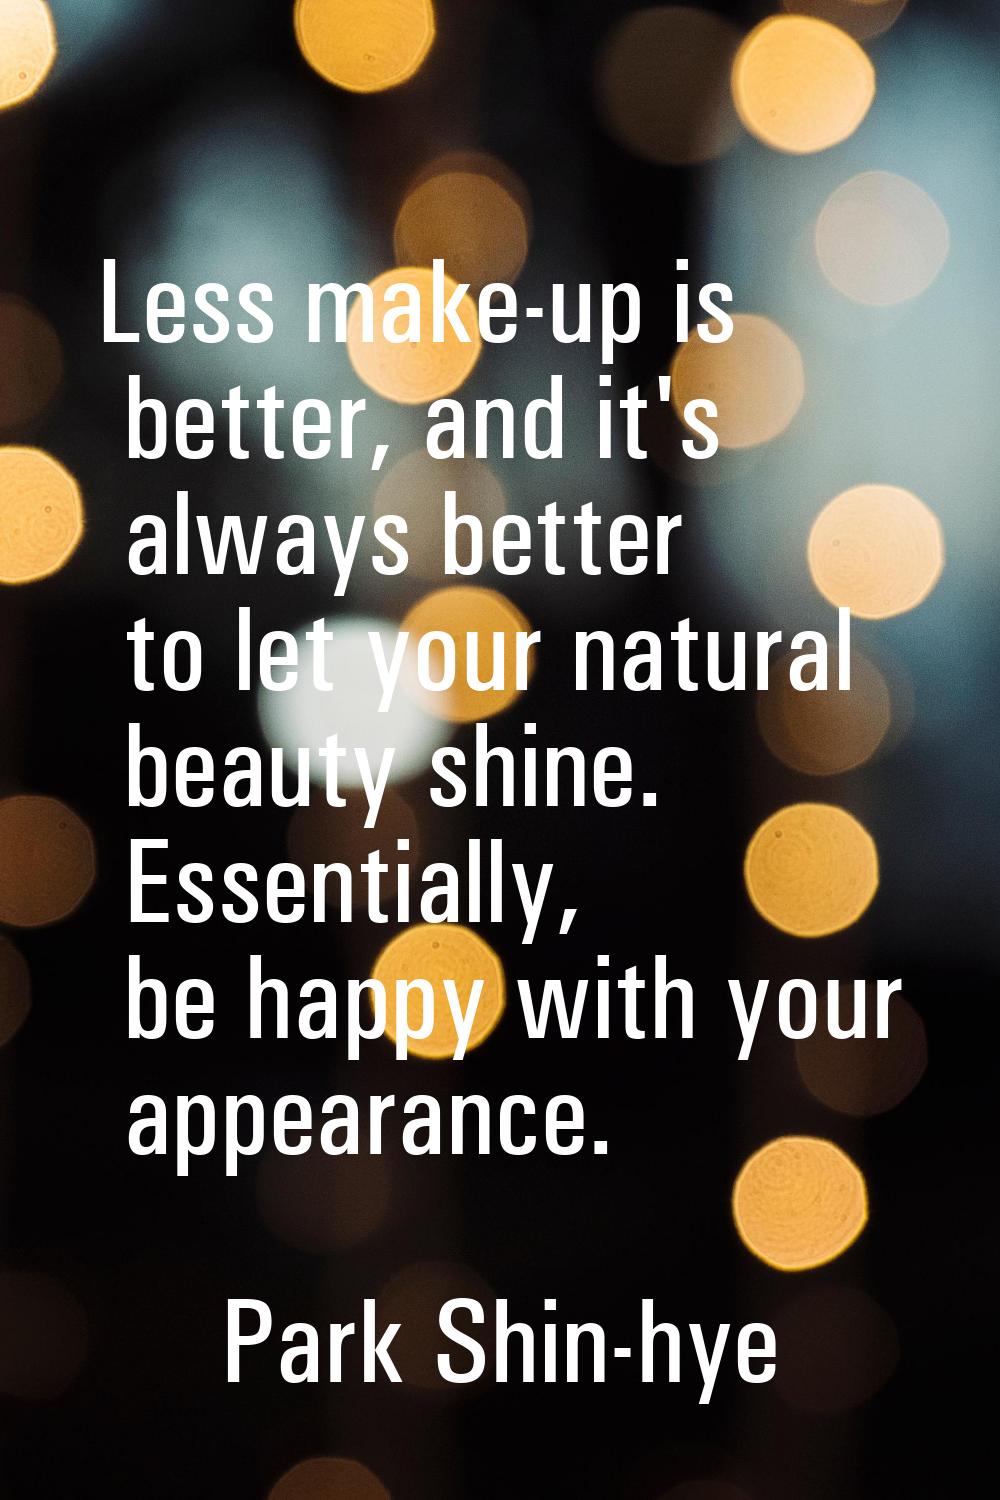 Less make-up is better, and it's always better to let your natural beauty shine. Essentially, be ha